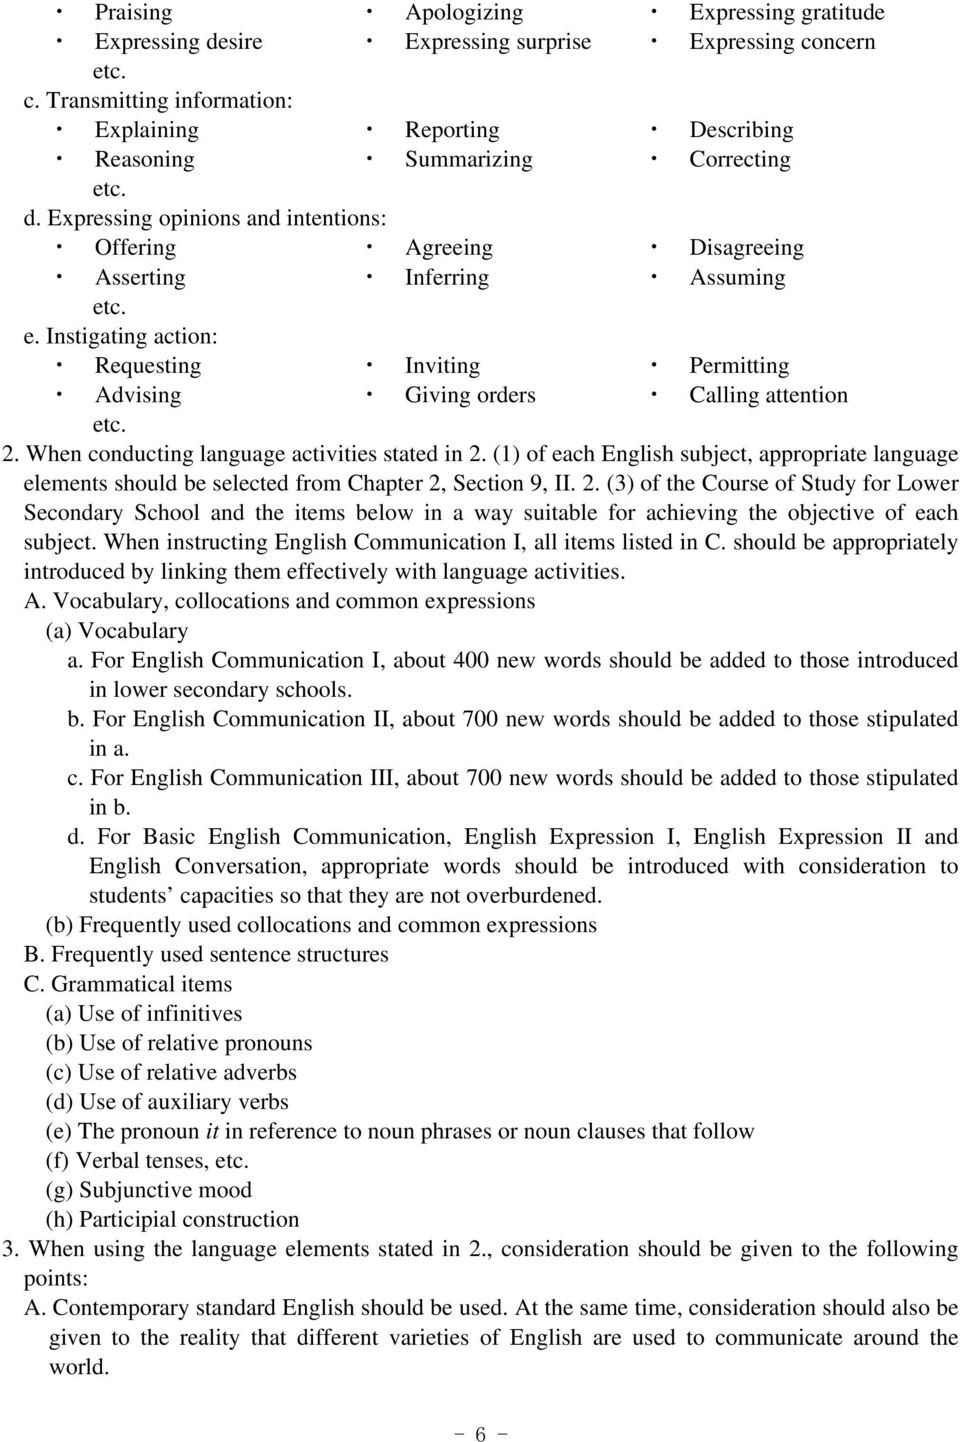 When conducting language activities stated in 2. (1) of each English subject, appropriate language elements should be selected from Chapter 2, Section 9, II. 2. (3) of the Course of Study for Lower Secondary School and the items below in a way suitable for achieving the objective of each subject.